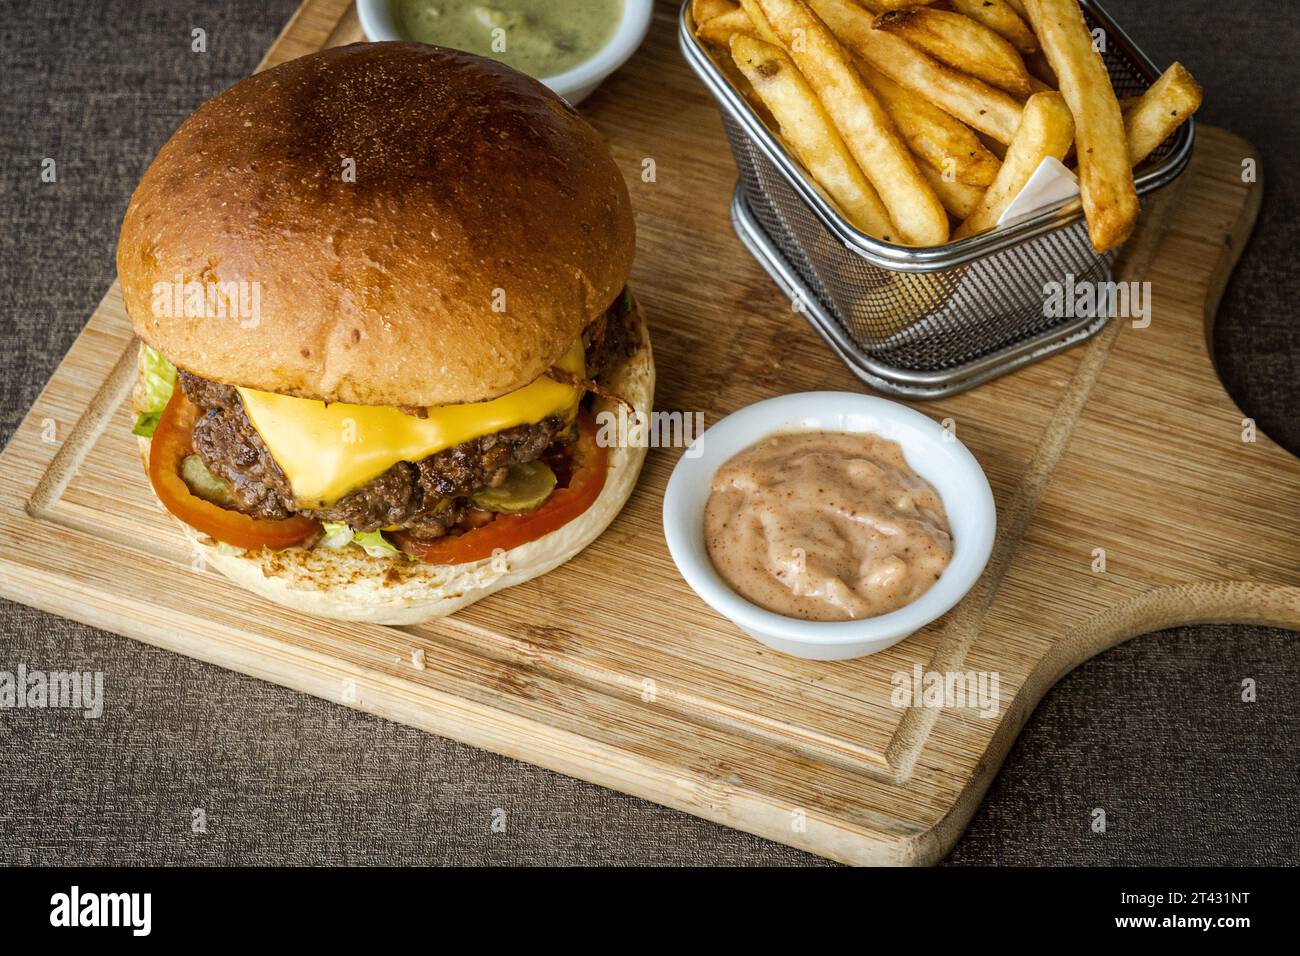 Overhead view of a double cheeseburger with chips and sauces Stock Photo